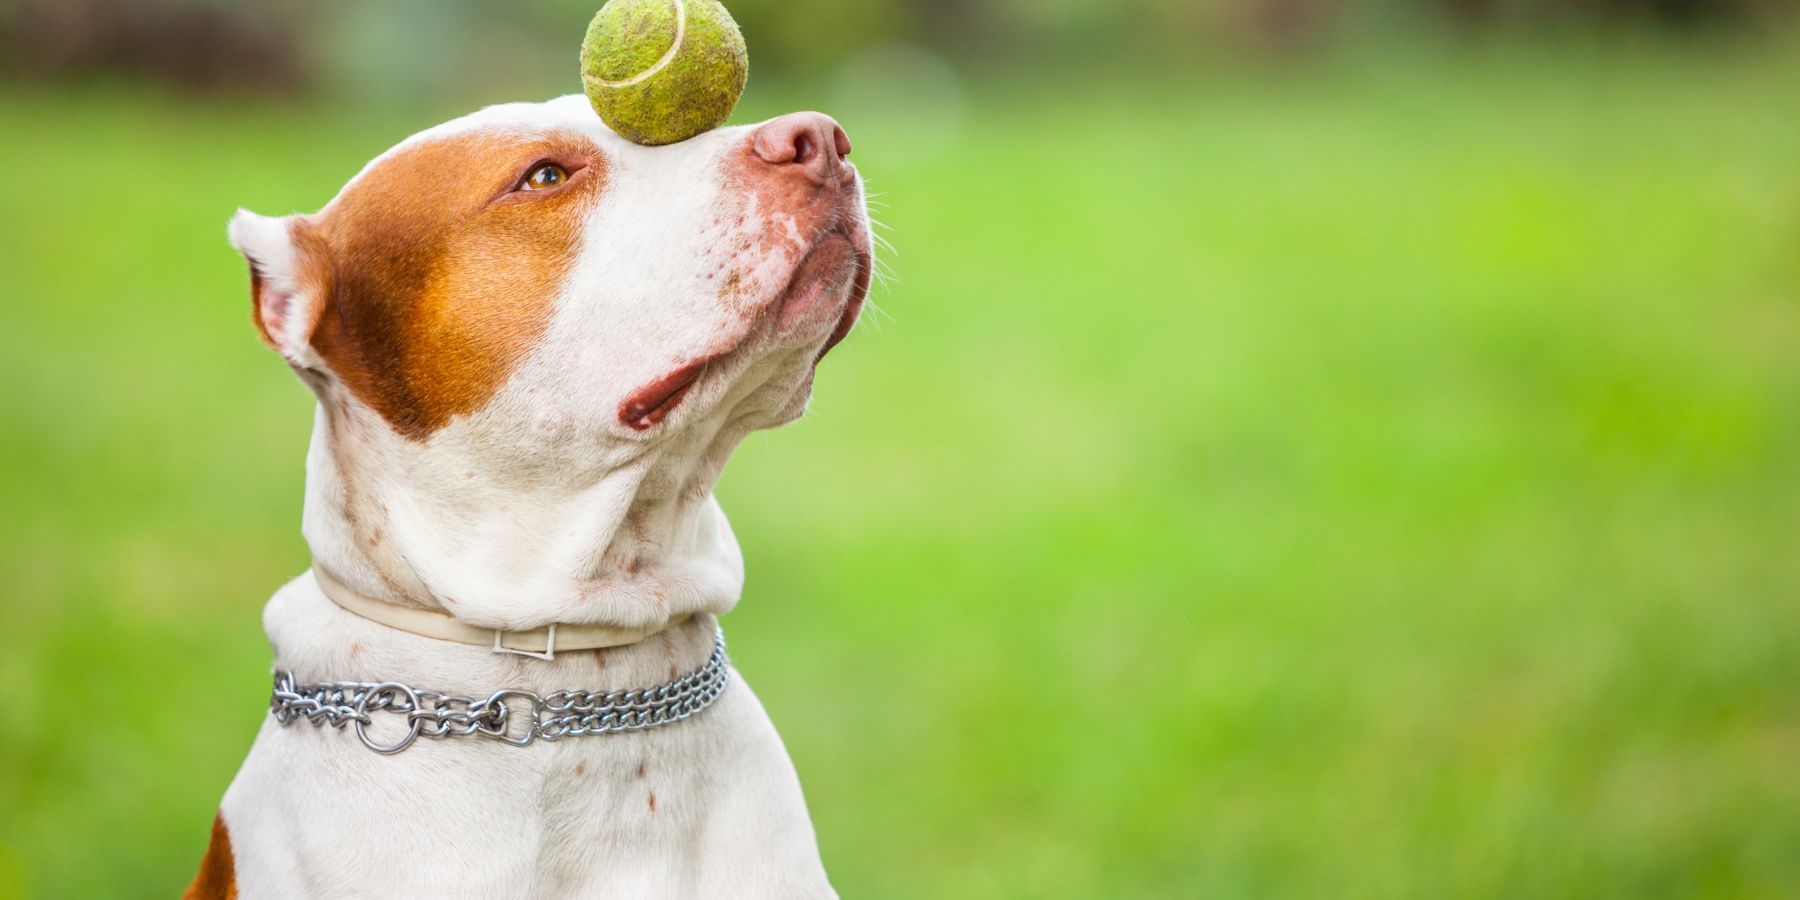 The Ultimate Guide to Ball Launchers for Energetic Dogs